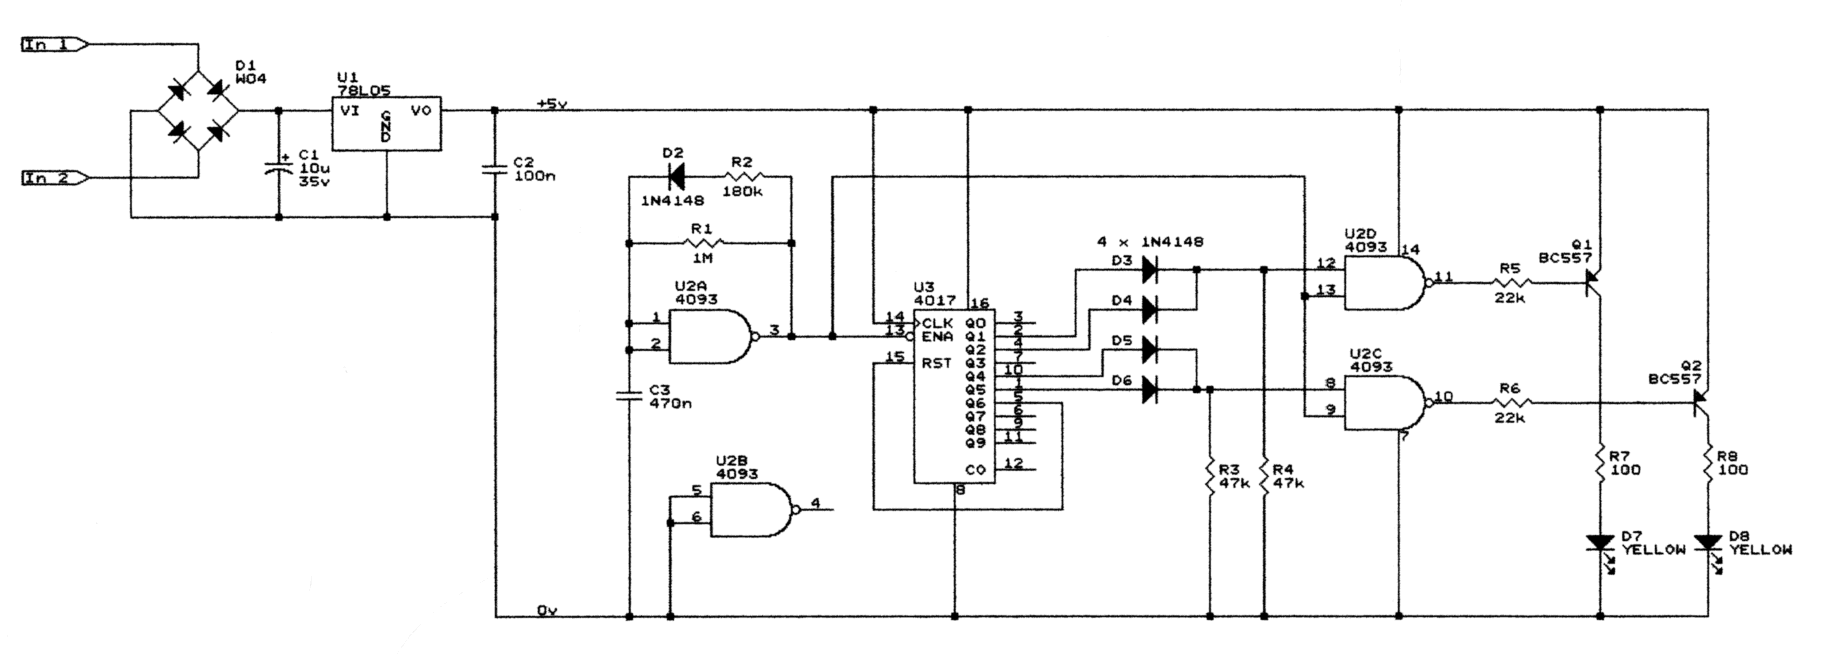 Figure 2: The LED Flasher Module circuit diagram (Click to enlarge)